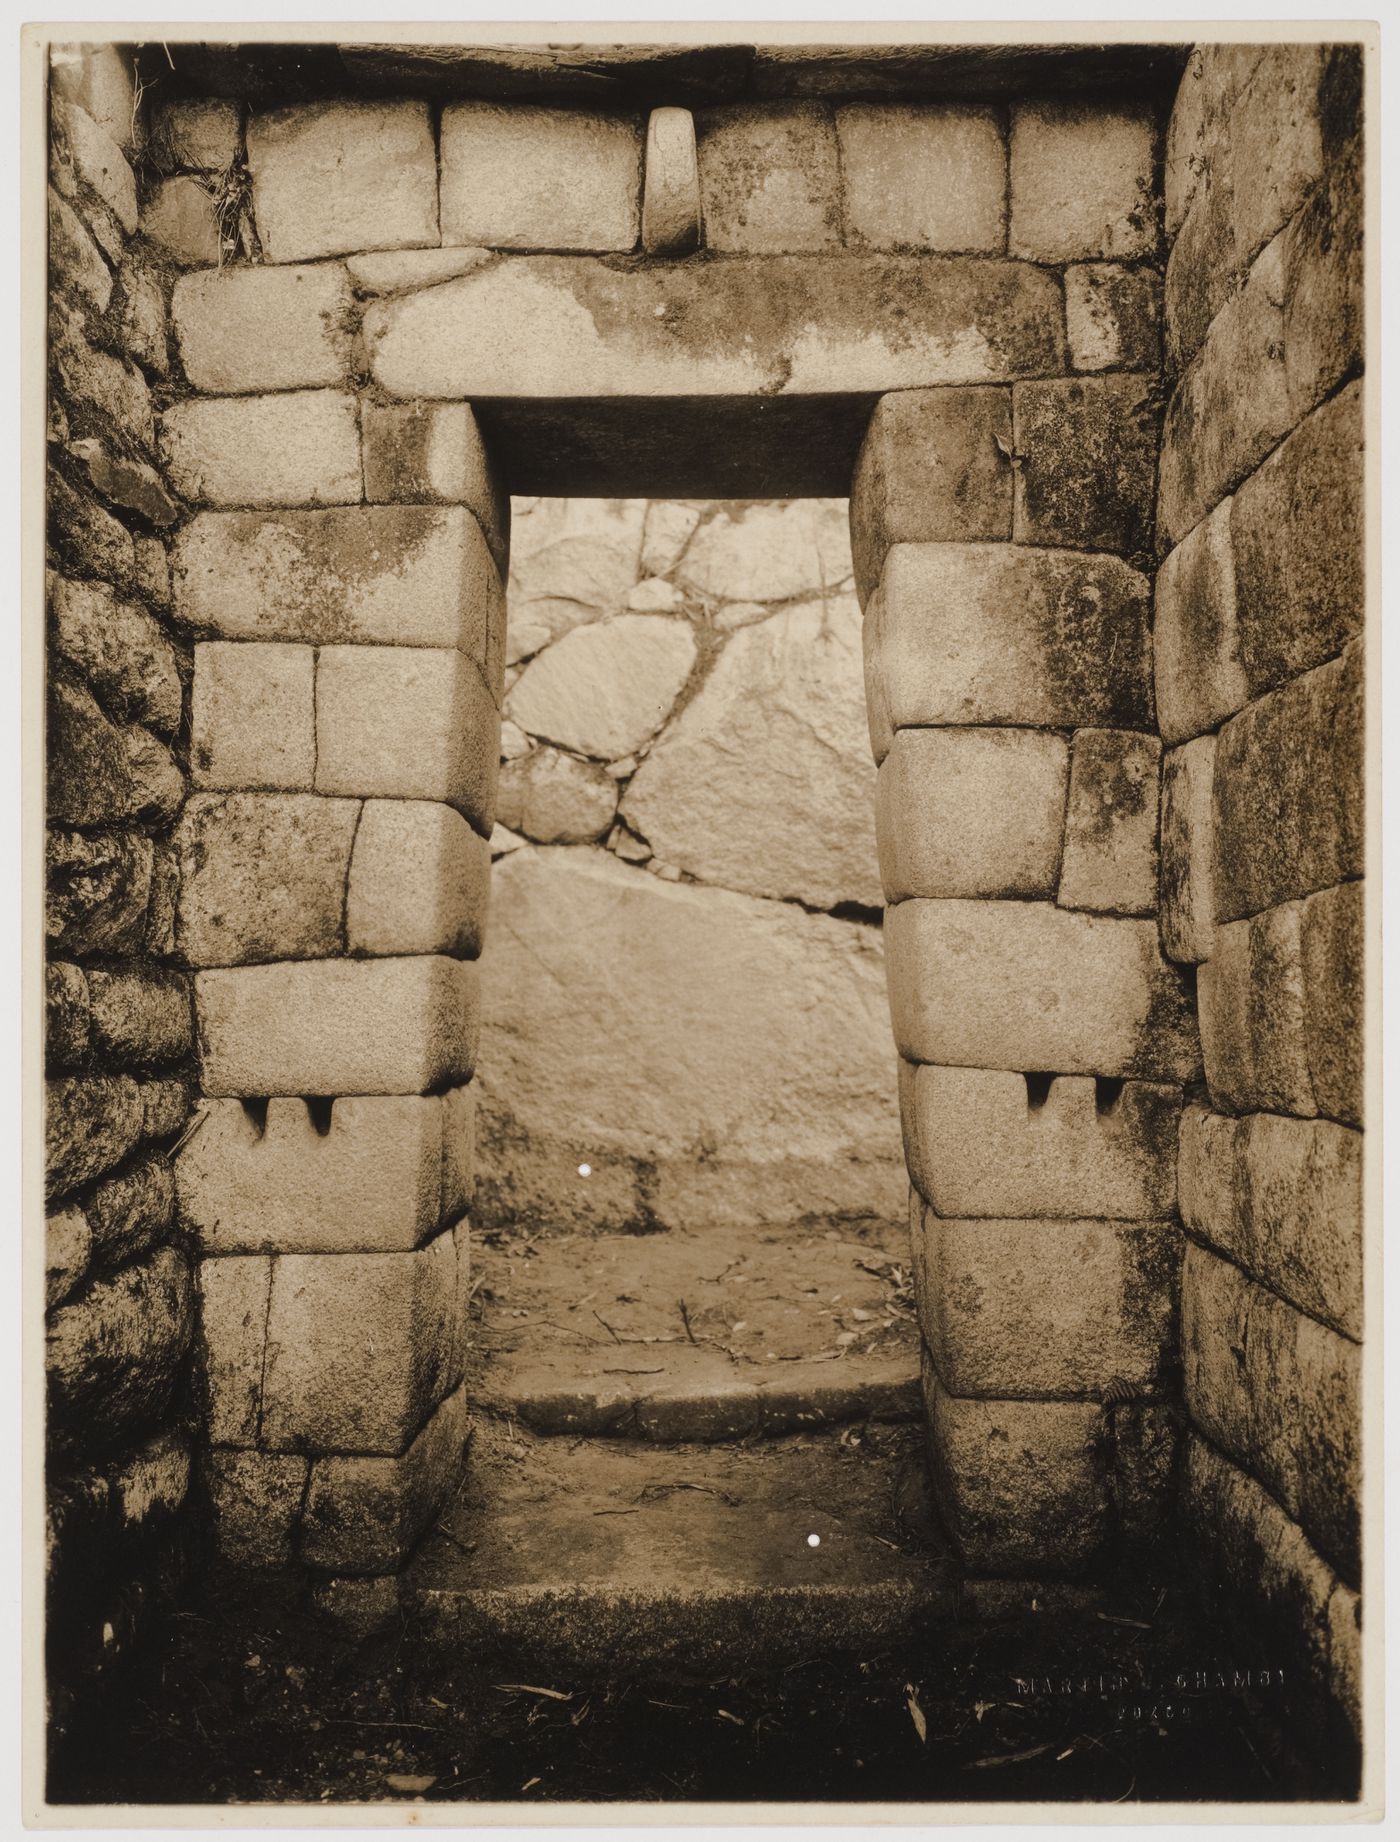 View of an entrance located in the alley beside the House of Ñusta [princess], Machu Picchu, Peru